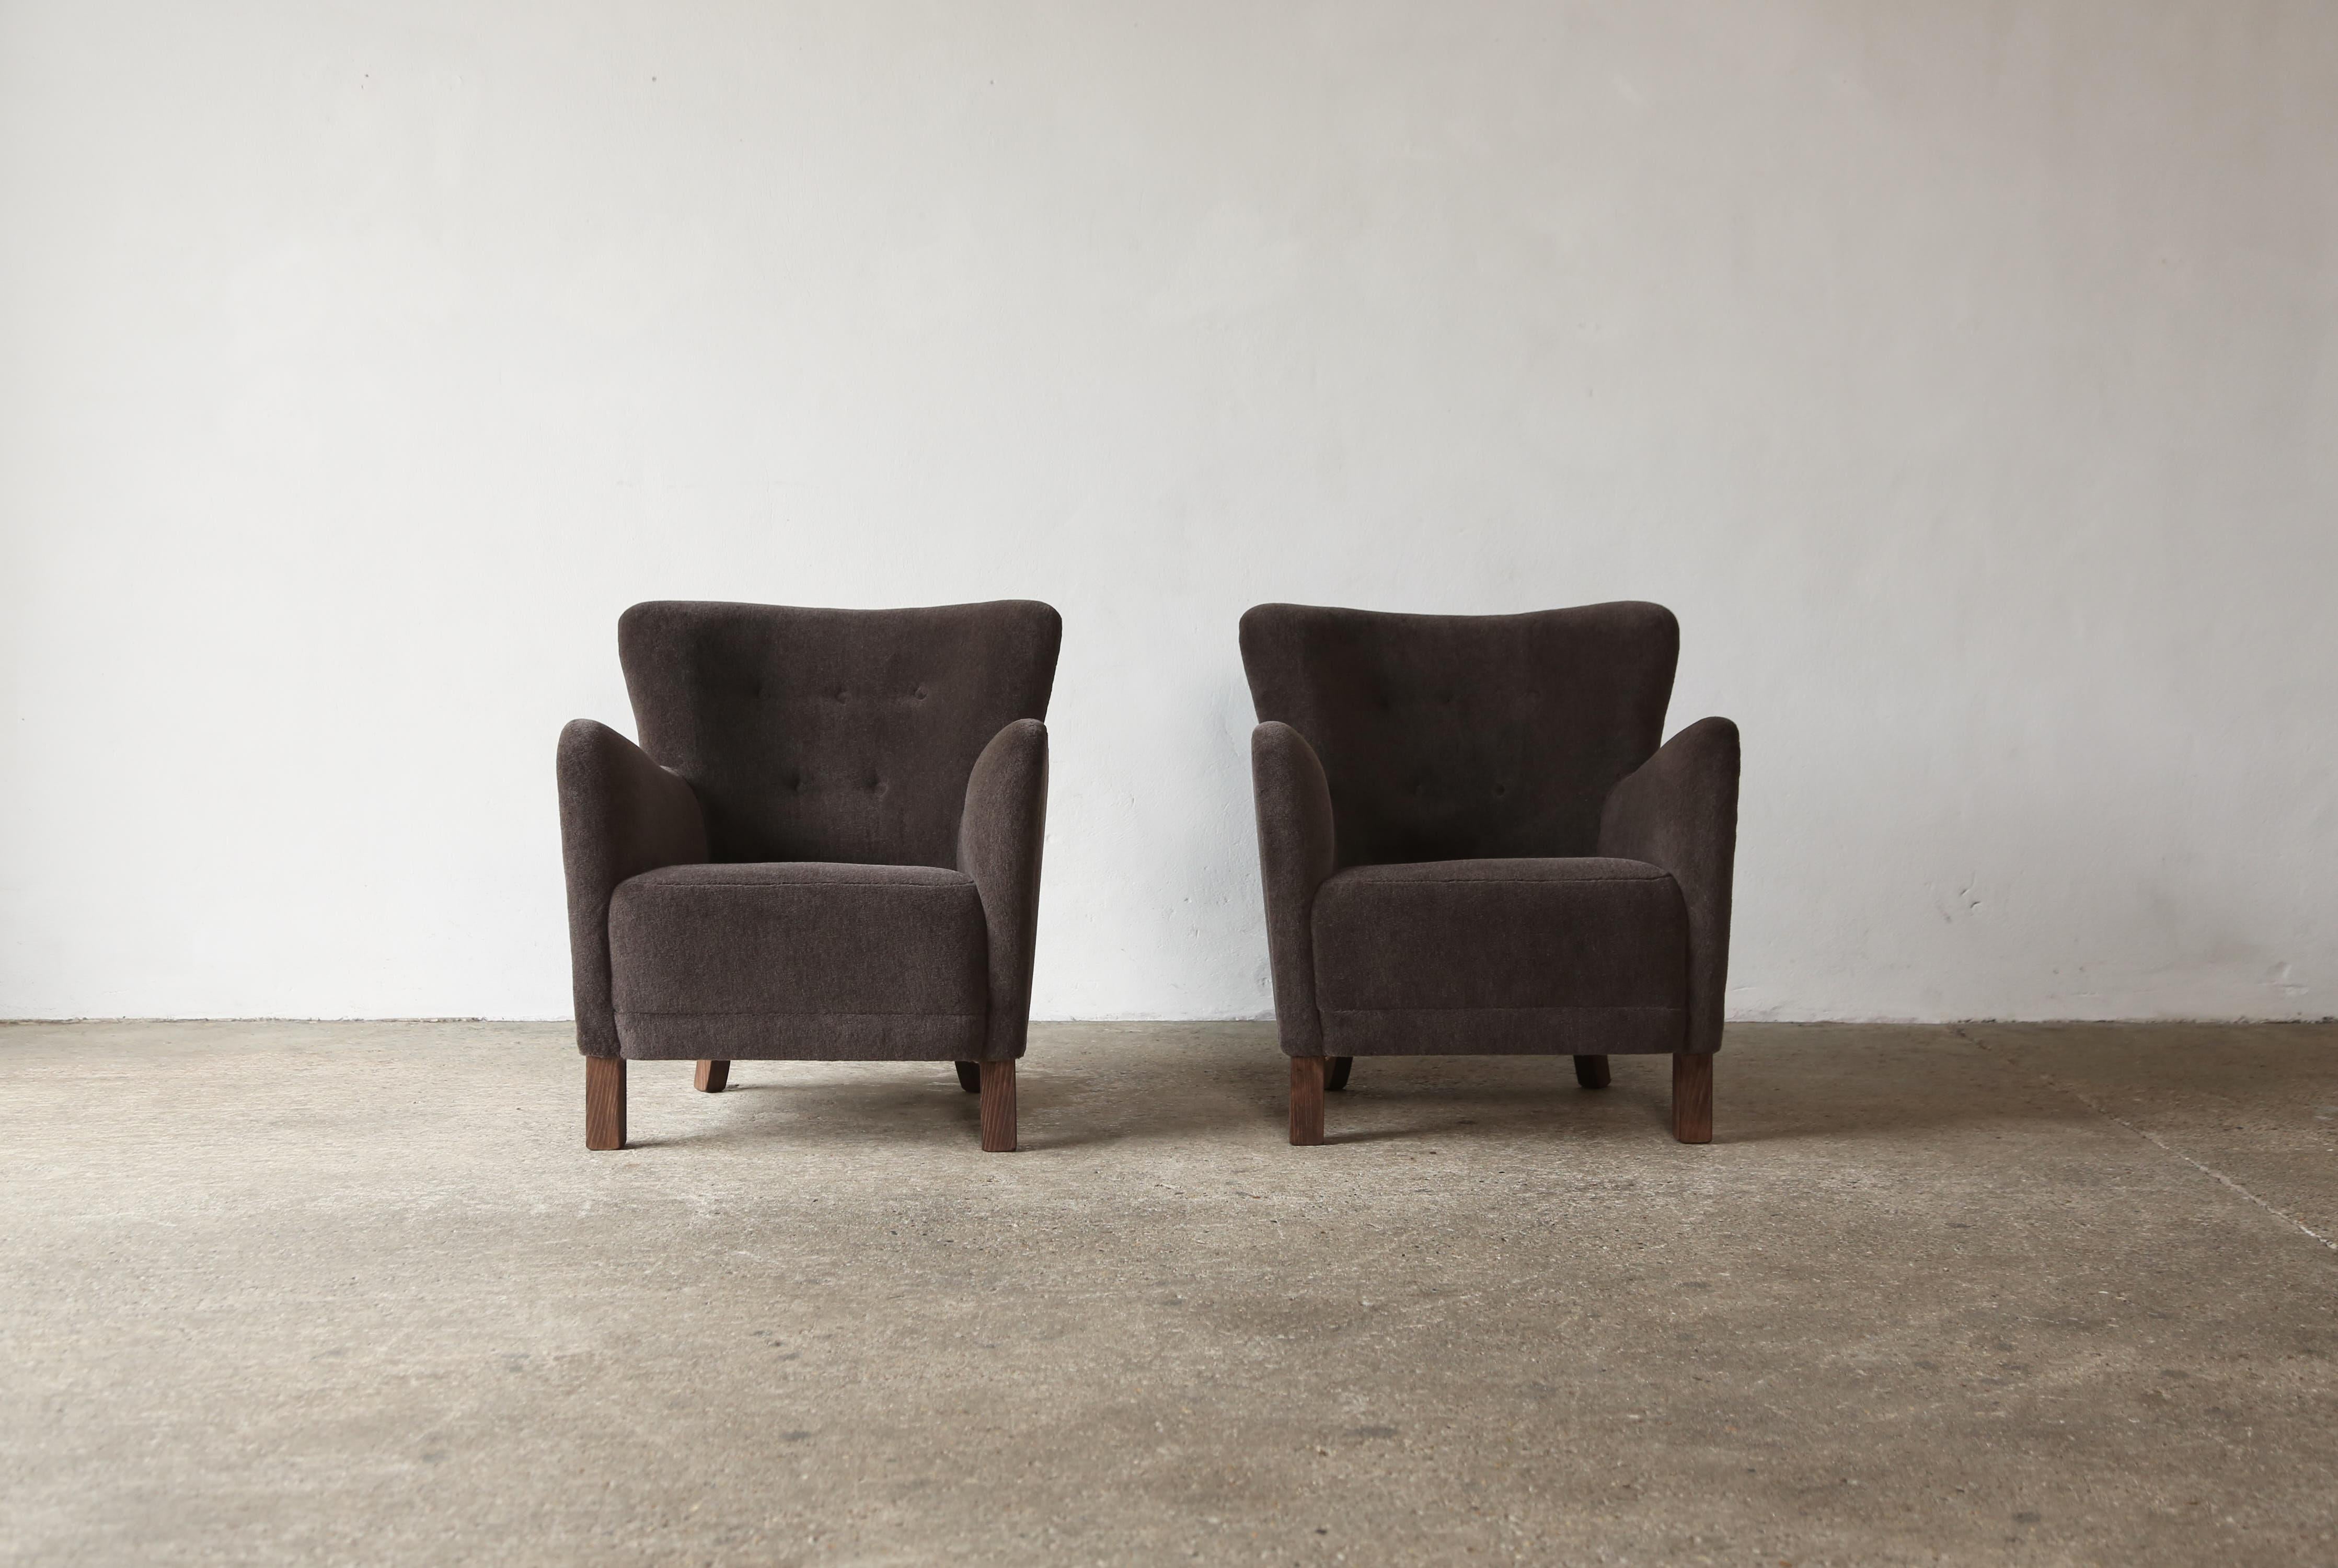 British Pair of Armchairs, Upholstered in Pure Alpaca